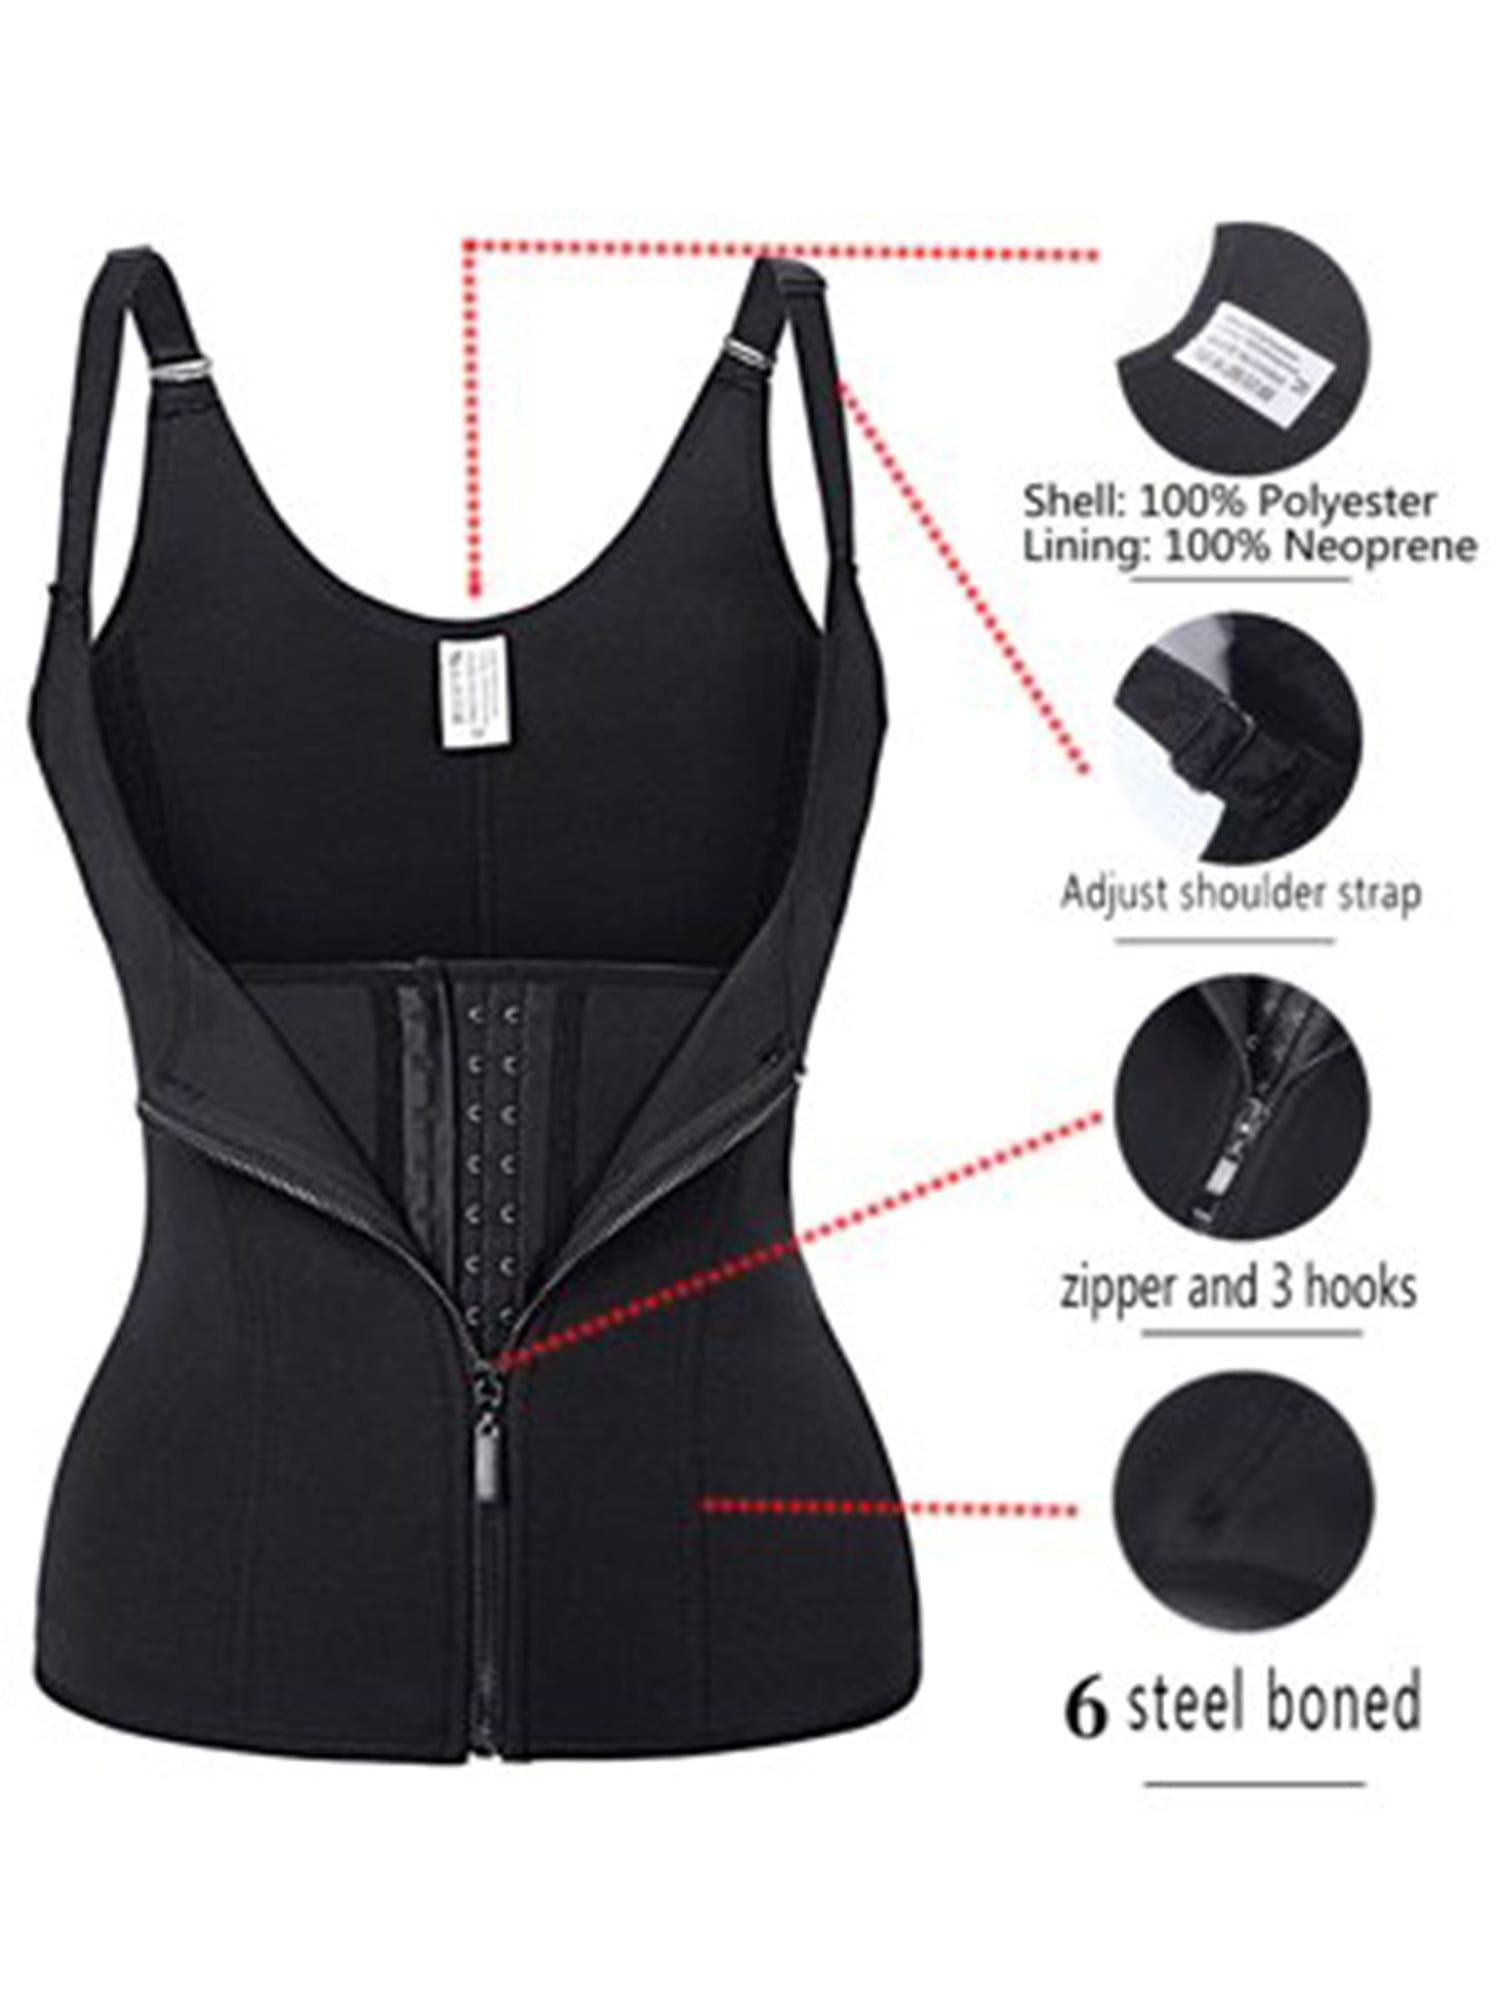 Lumbar Back Supports Waist Trainer Corset Steel Boned Body Shaper for Weight Loss Vest with Zip & Hook 